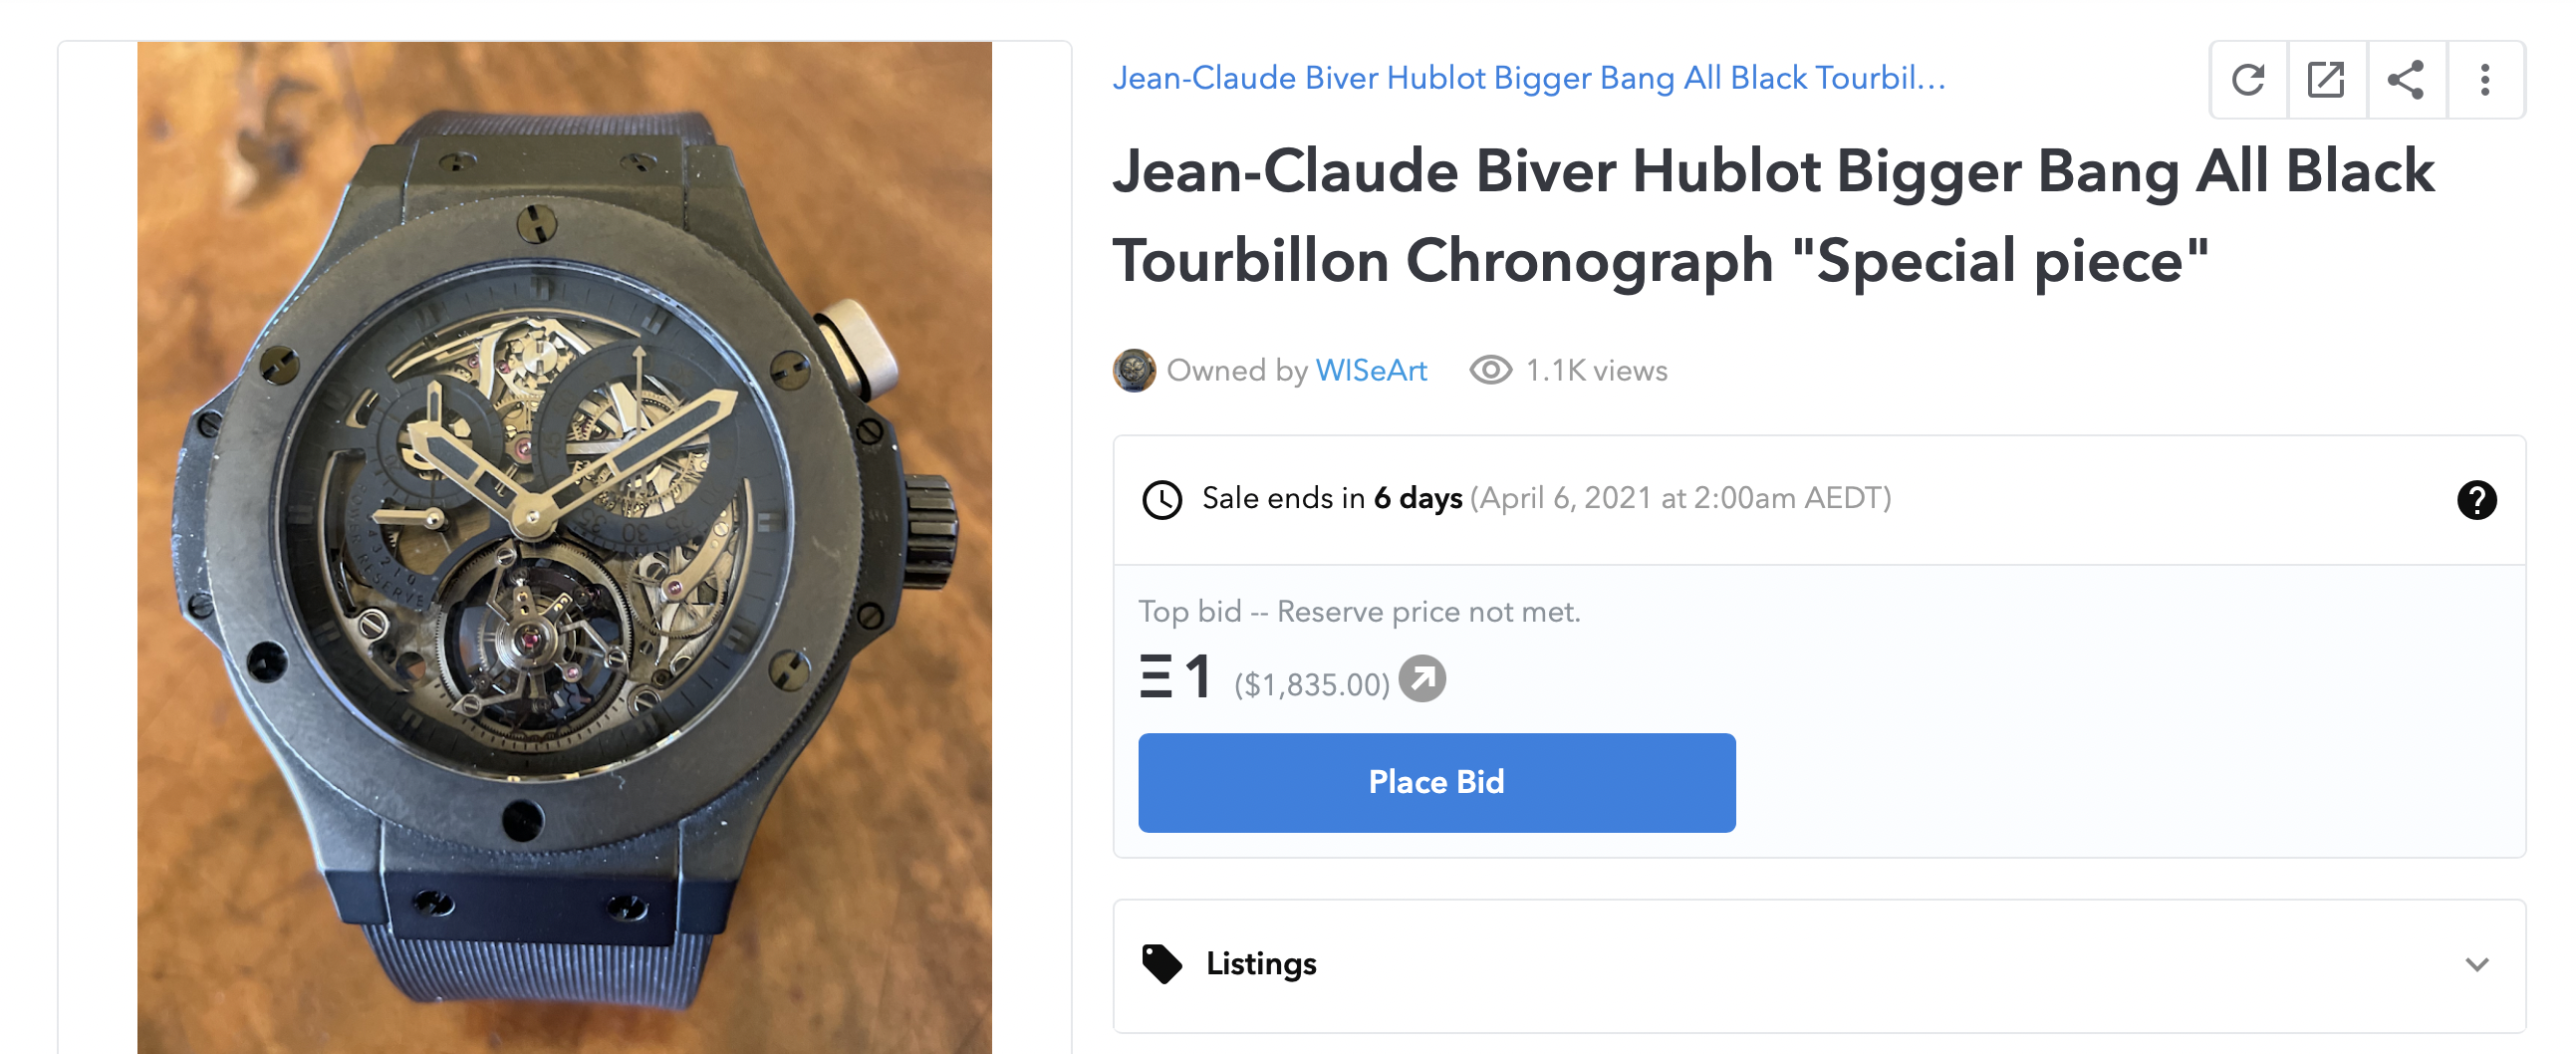 Watches Enter NFT Space with Digital Edition of Famed Biver Hublot